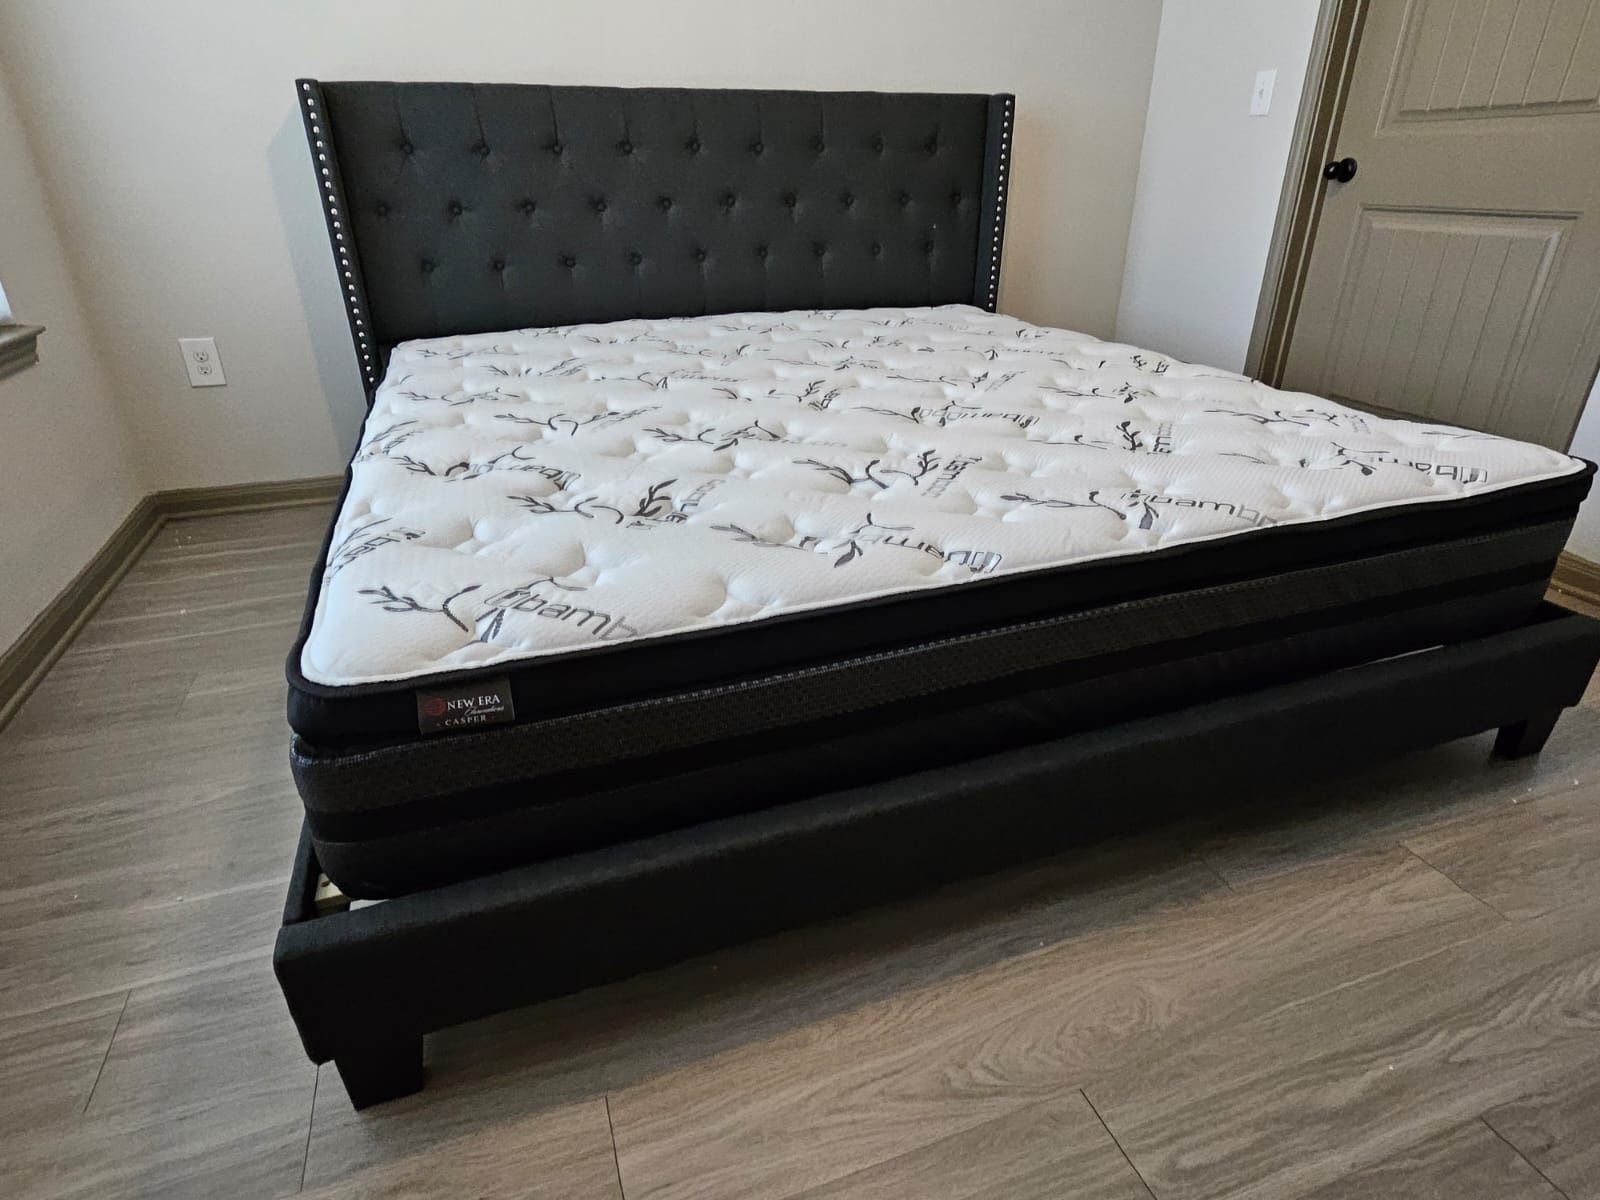 New KING SIZE BED